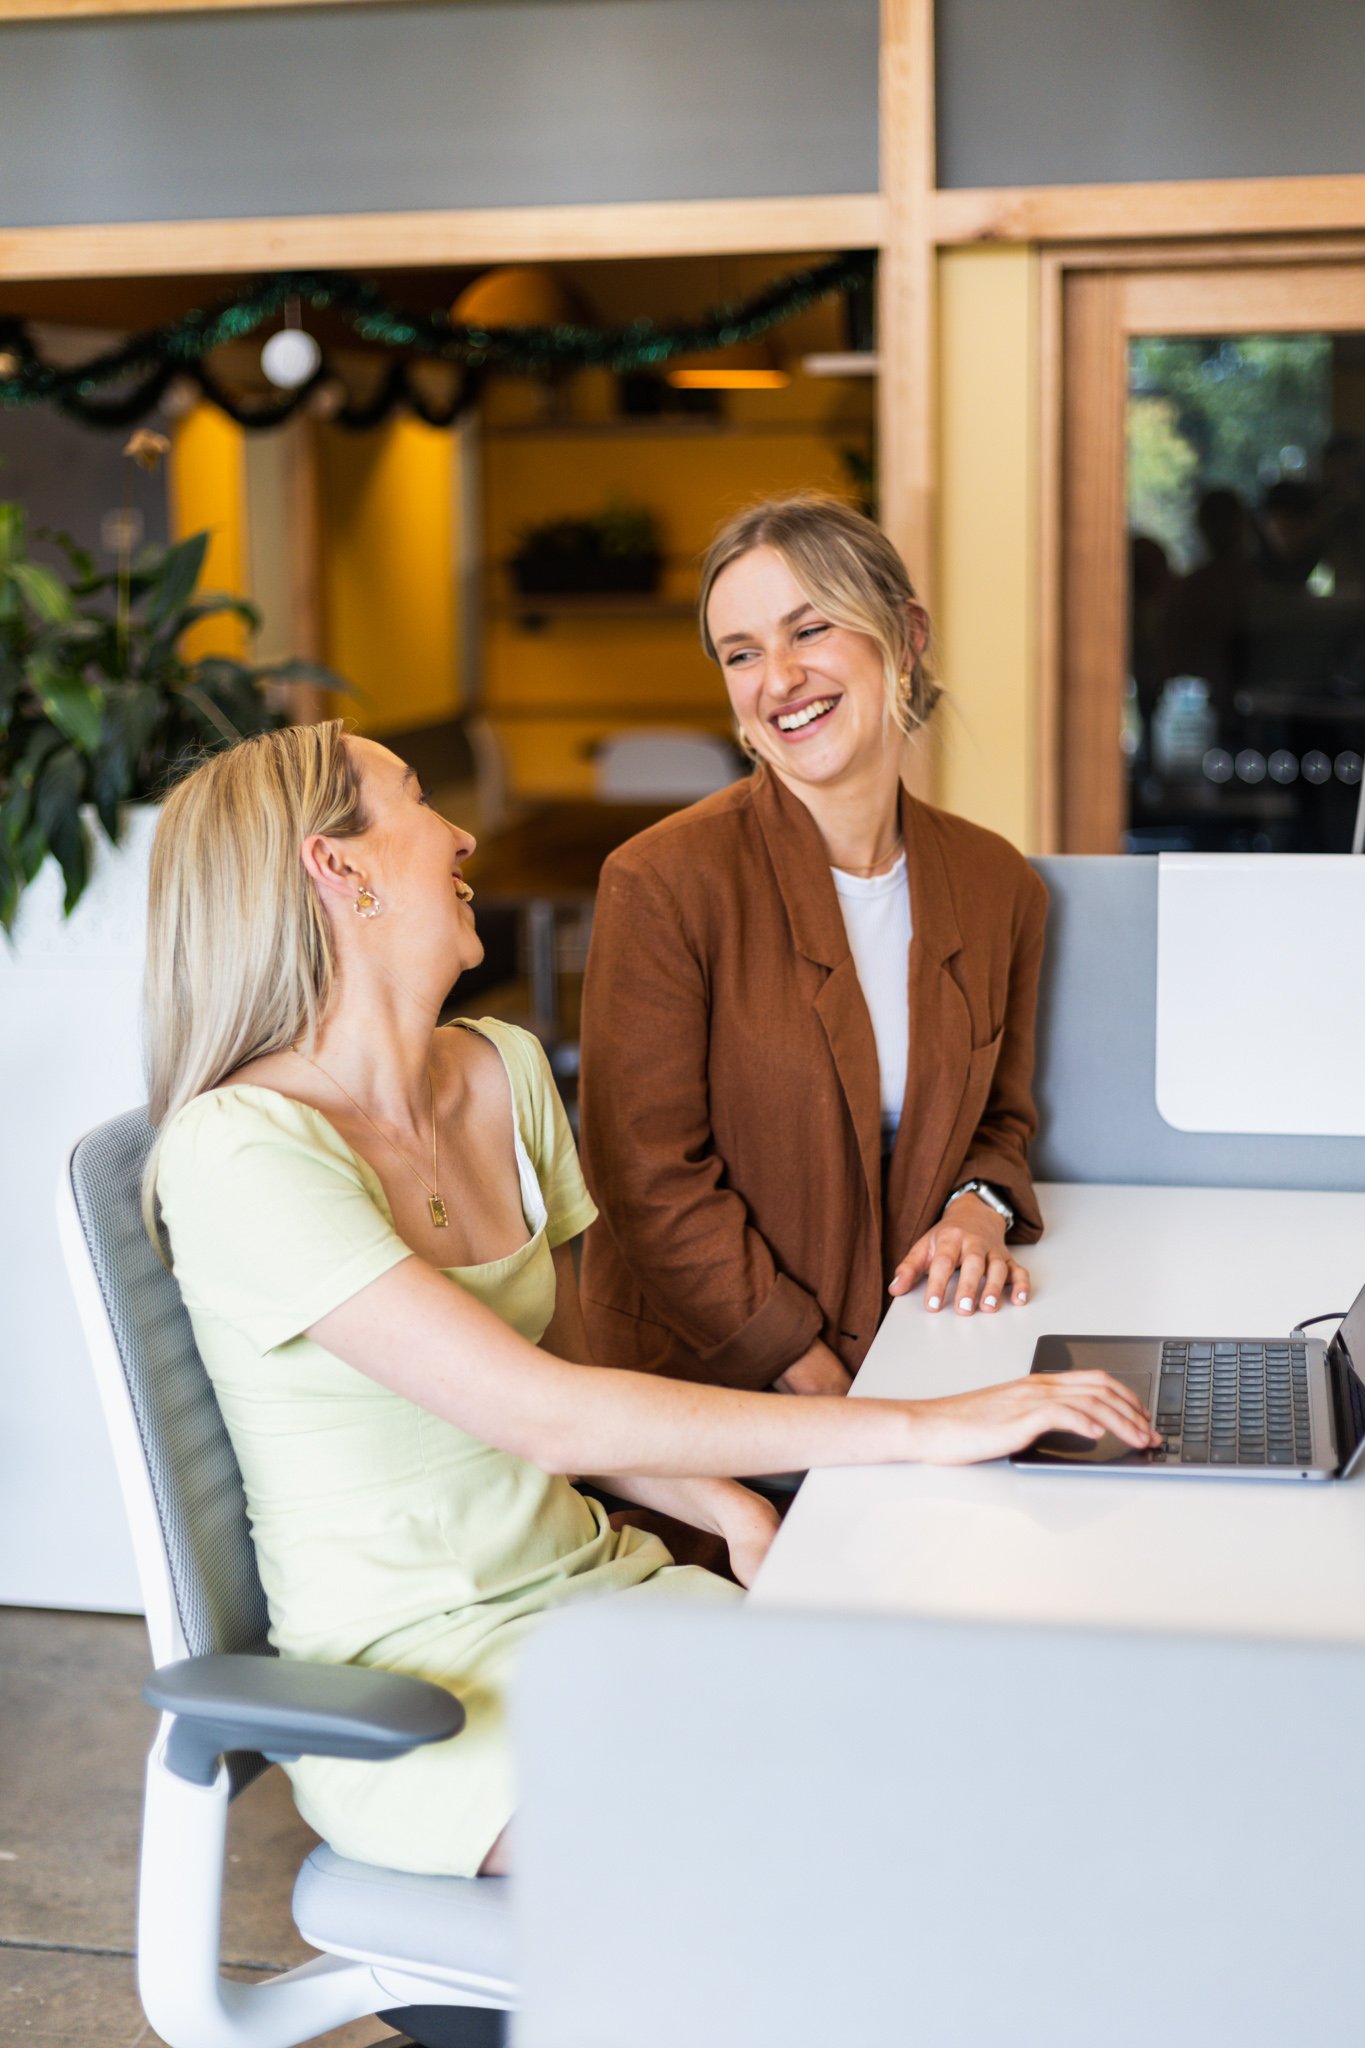 Canberra branding photographer - women laughing in office